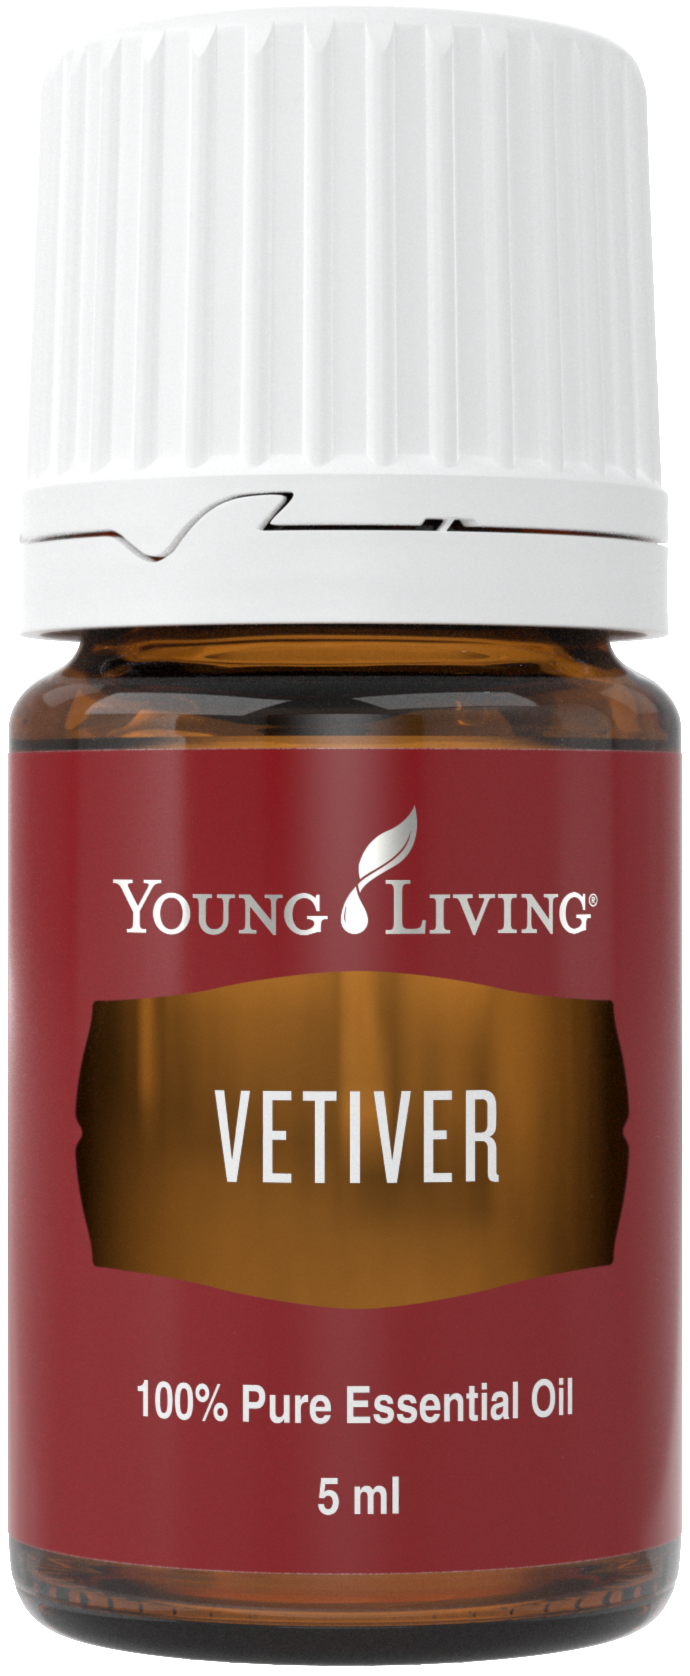 Vetiver essential oil benefits and uses Young Living